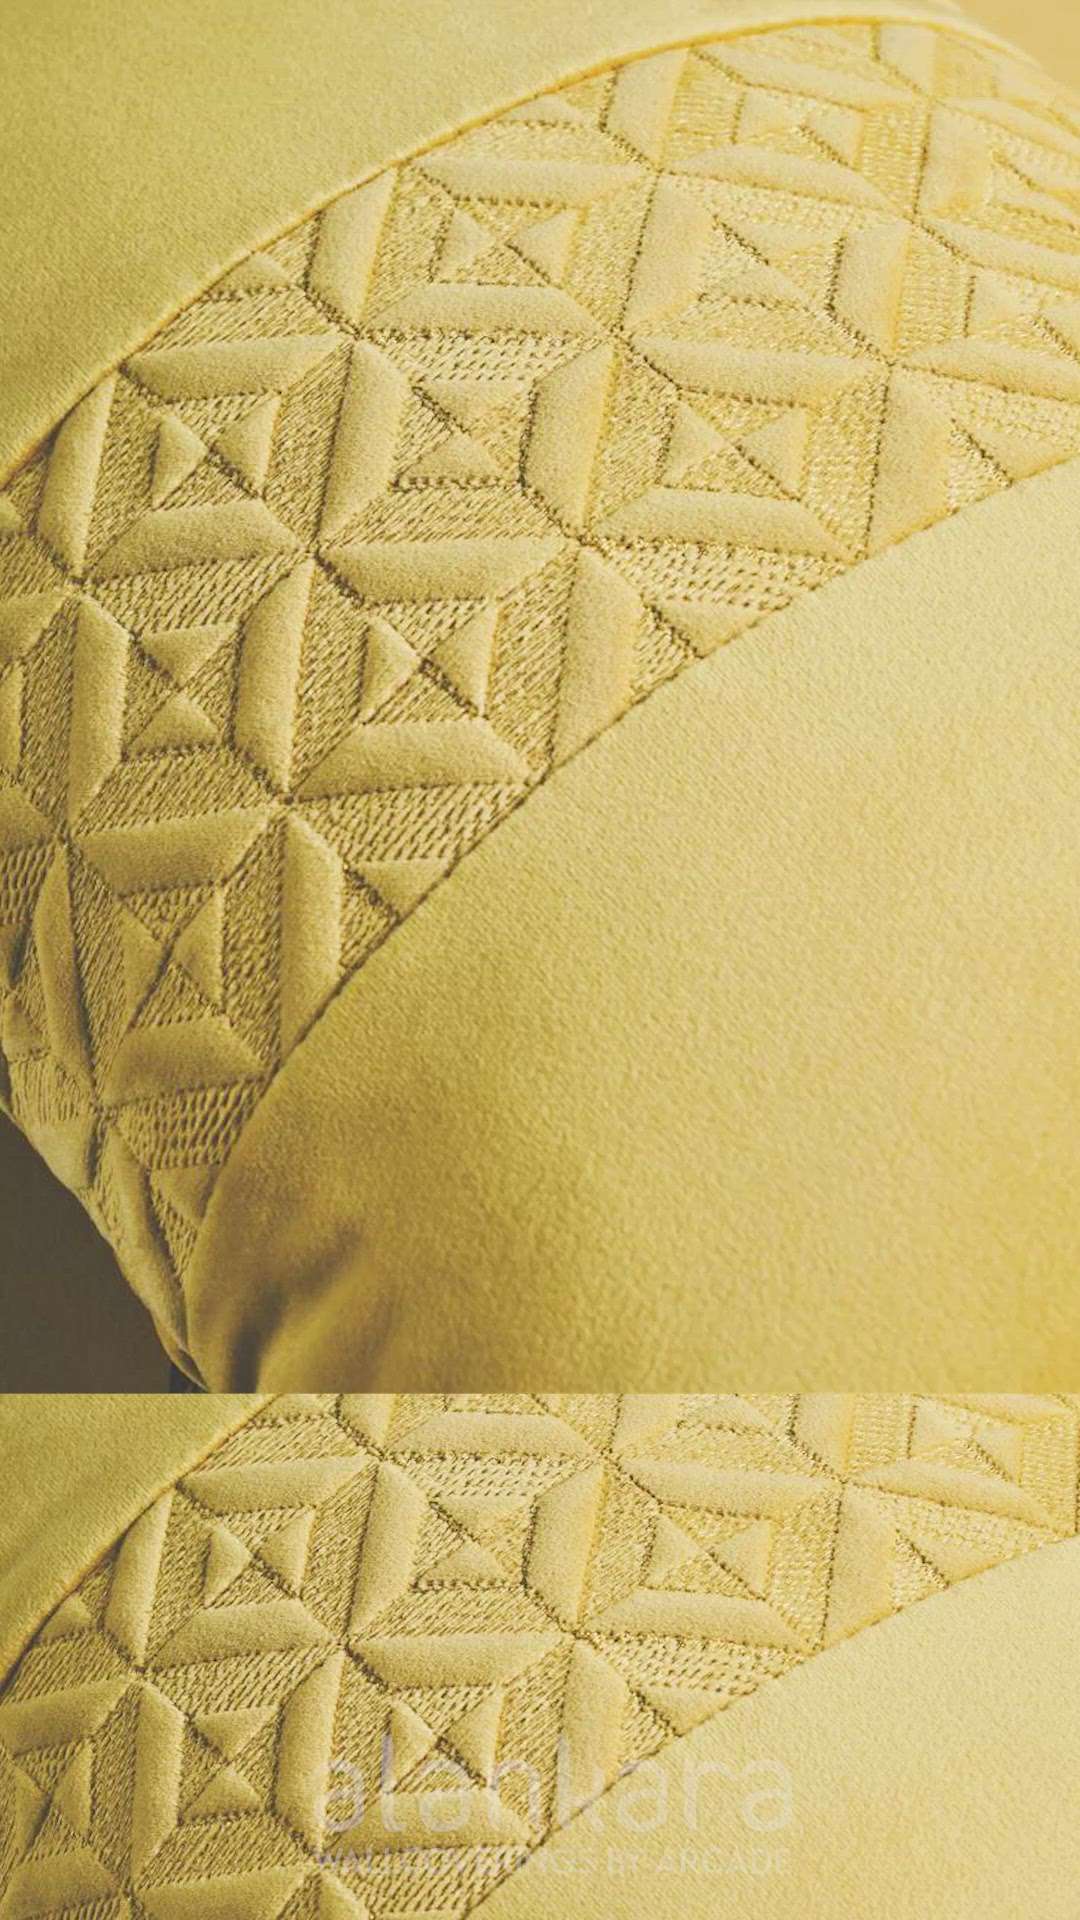 Yell Ohhh mania

Your interior will shine in yellow. Your sofa will glitter in luxury.

An Alluring Alankara promise

Wonderful Walls. Wonderful Homes. Alankara Promise

ᴅo ᴠisit ᴏur ꜱhowroom at
Cochin
Alankara Wallcovering
Near Pulinchod Metro Station, Metro Pillar No 76, Aluva, Kochin,Kerala 683101
Ph: 8089181314,
9995340439
*
*
*
Do ᴠisit ᴏur ꜱhowroom at
Bengalore
Alankara Wallcovering
8/9 First Floor, Oppo Mahaveer Ranches, Hosa Road, Bengalore 560100
Ph: 8129773421,
9995340439

#customizedwallpaper #wallpapers #instagram #customizedsofa #decorcurtain #woodenblinds #blinds #rollerblinds #officeblinds #zebrablinds #windowcurtain #artificialgrass #artificialverticalgarden #bangalore #kochi #alankara #alankarawallcovering #home #reels #instagram #instagramreels #reelsinstagram #instagood #facebook